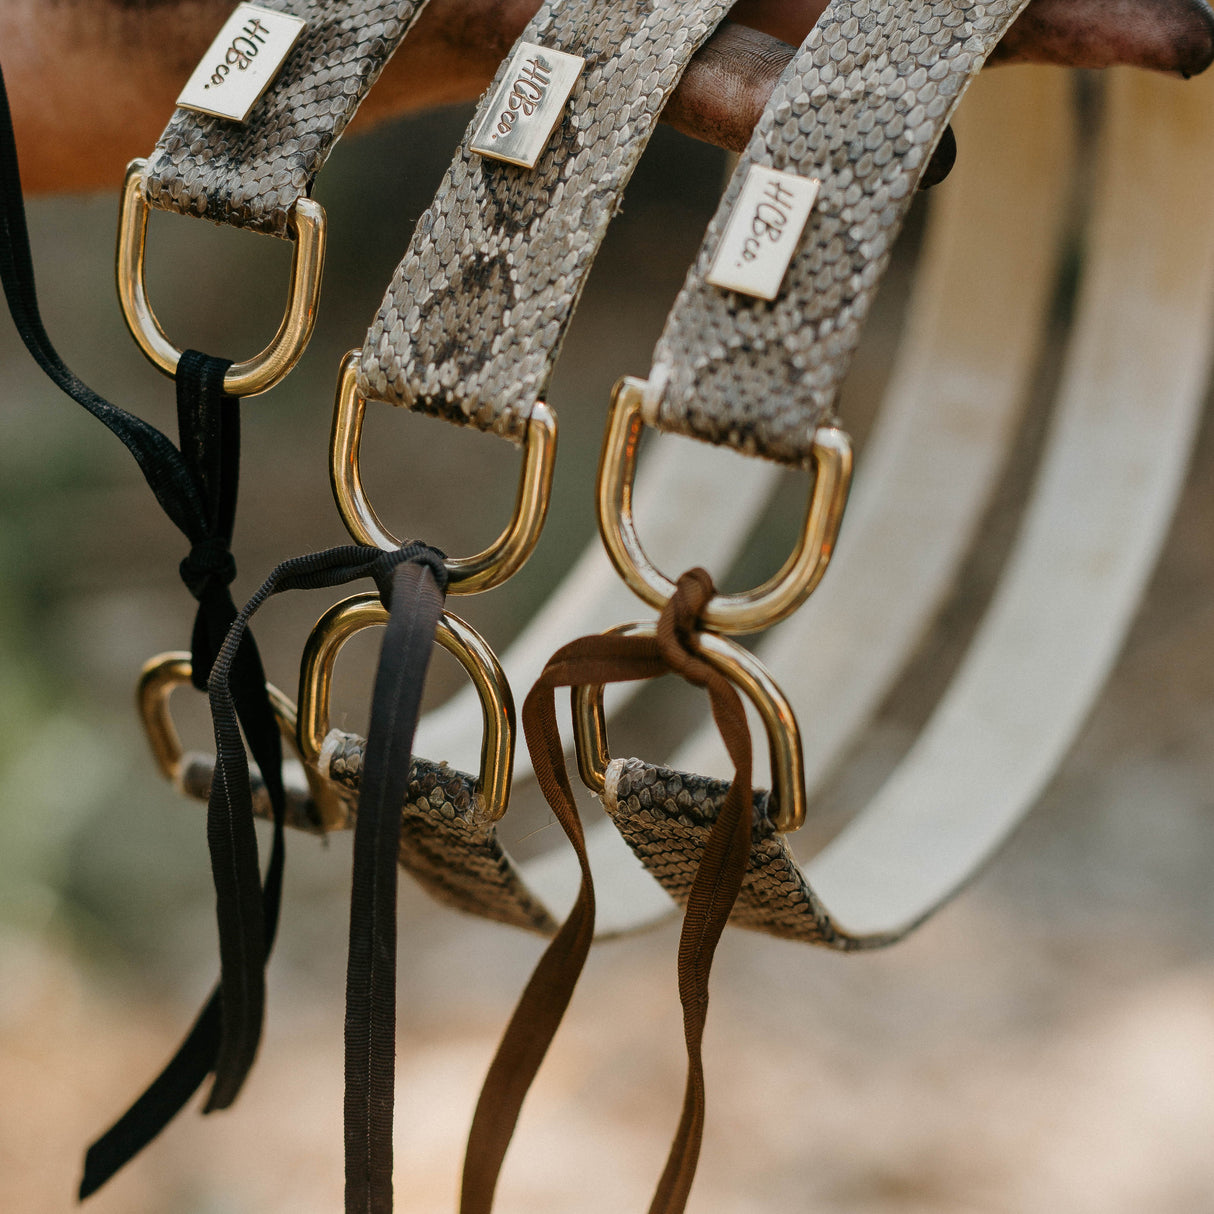 Elevate your hat game with our handcrafted rattlesnake leather hatband featuring a gem stud accent. Meticulously crafted to exude authentic Western spirit, this unique accessory adds rugged charm and timeless appeal to any cowboy hat. Stand out with style and sophistication inspired by the Wild West